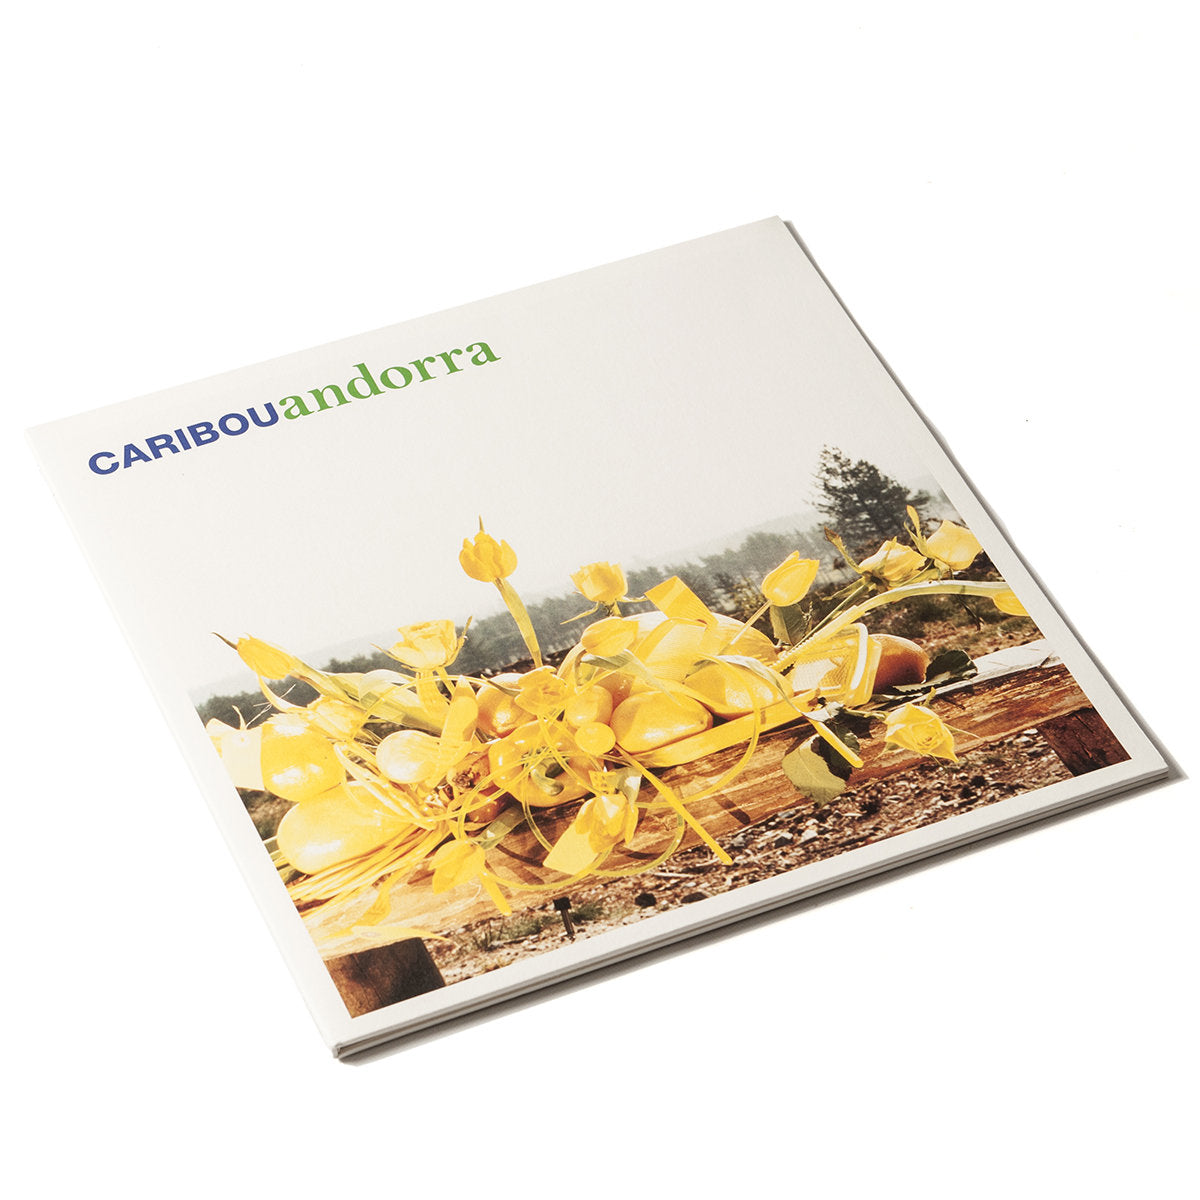 Caribou - Andorra "15th Anniversary Edition" (Limited Edition on 180g White Vinyl)